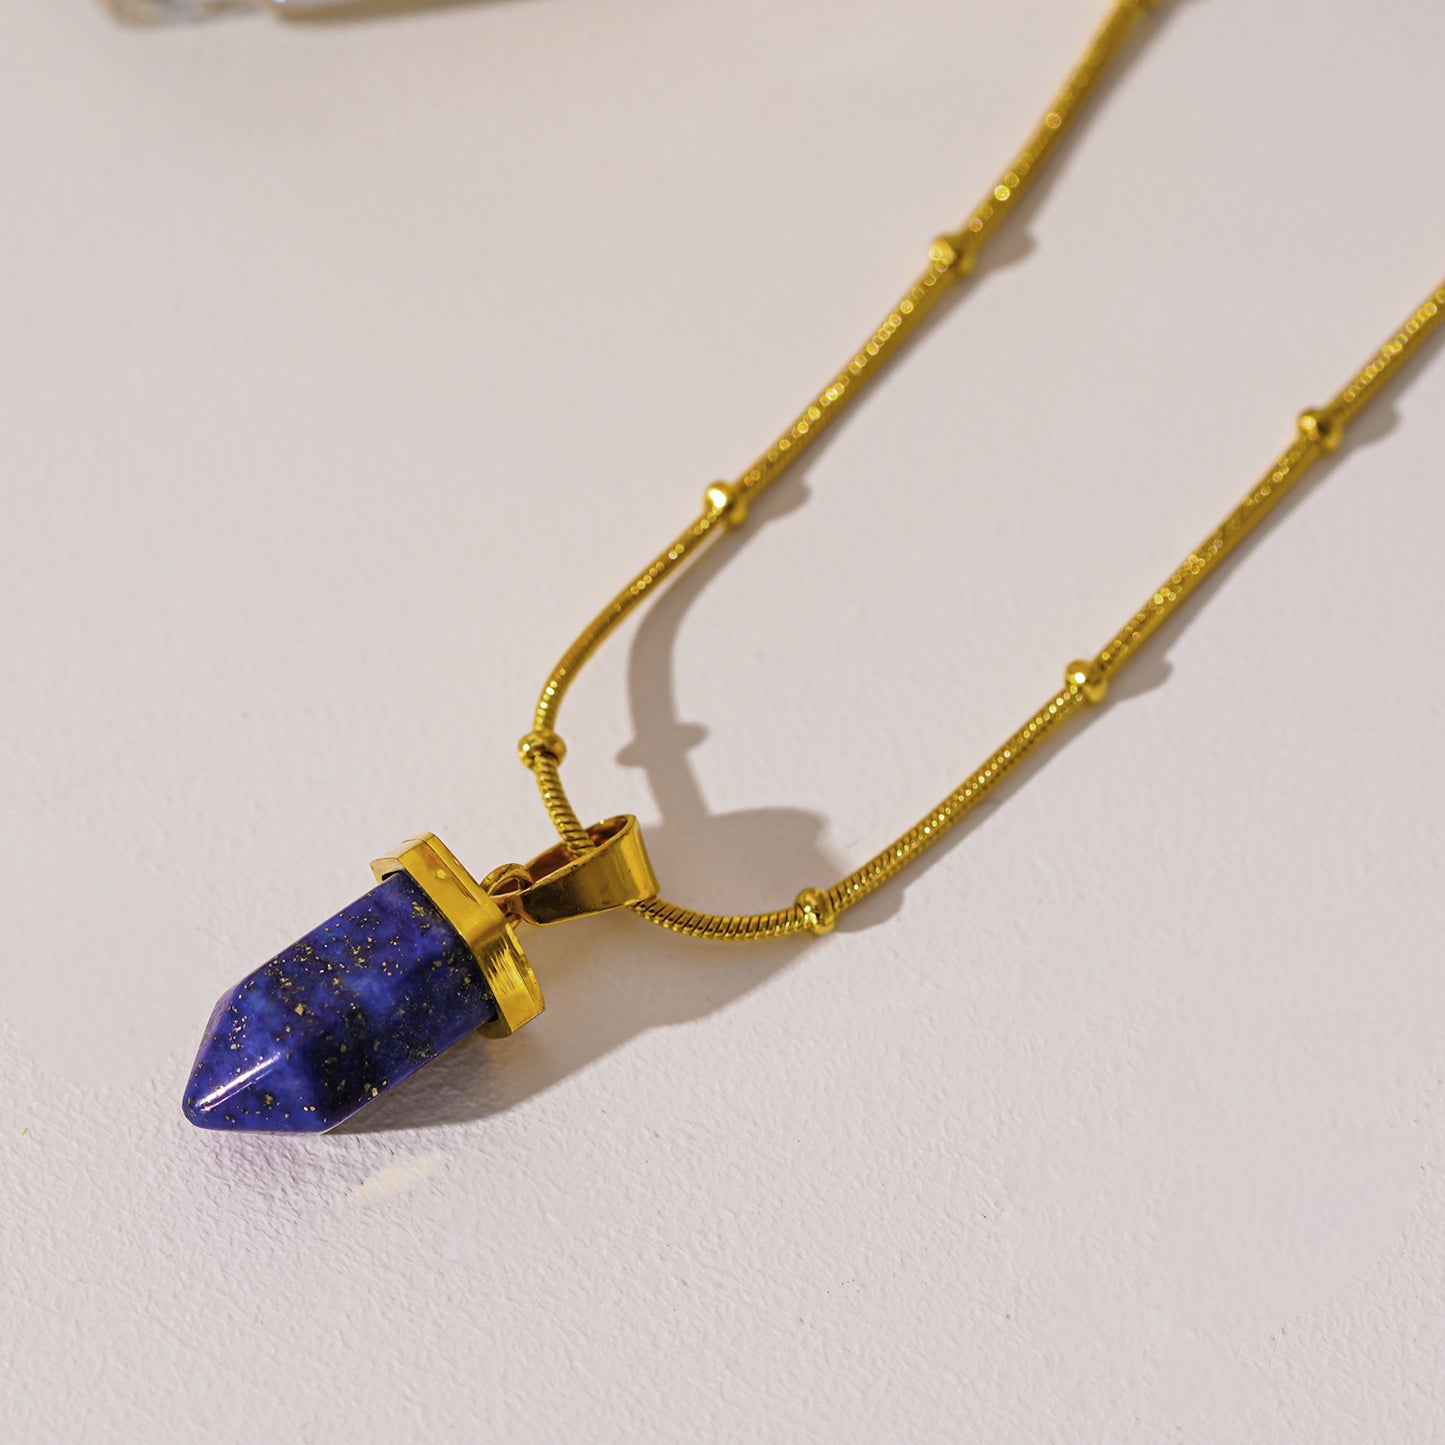 VIOLA: Lapis Lazuli Stone Pendant Anchored on a Beaded Snake Skin Textured Chain Necklace